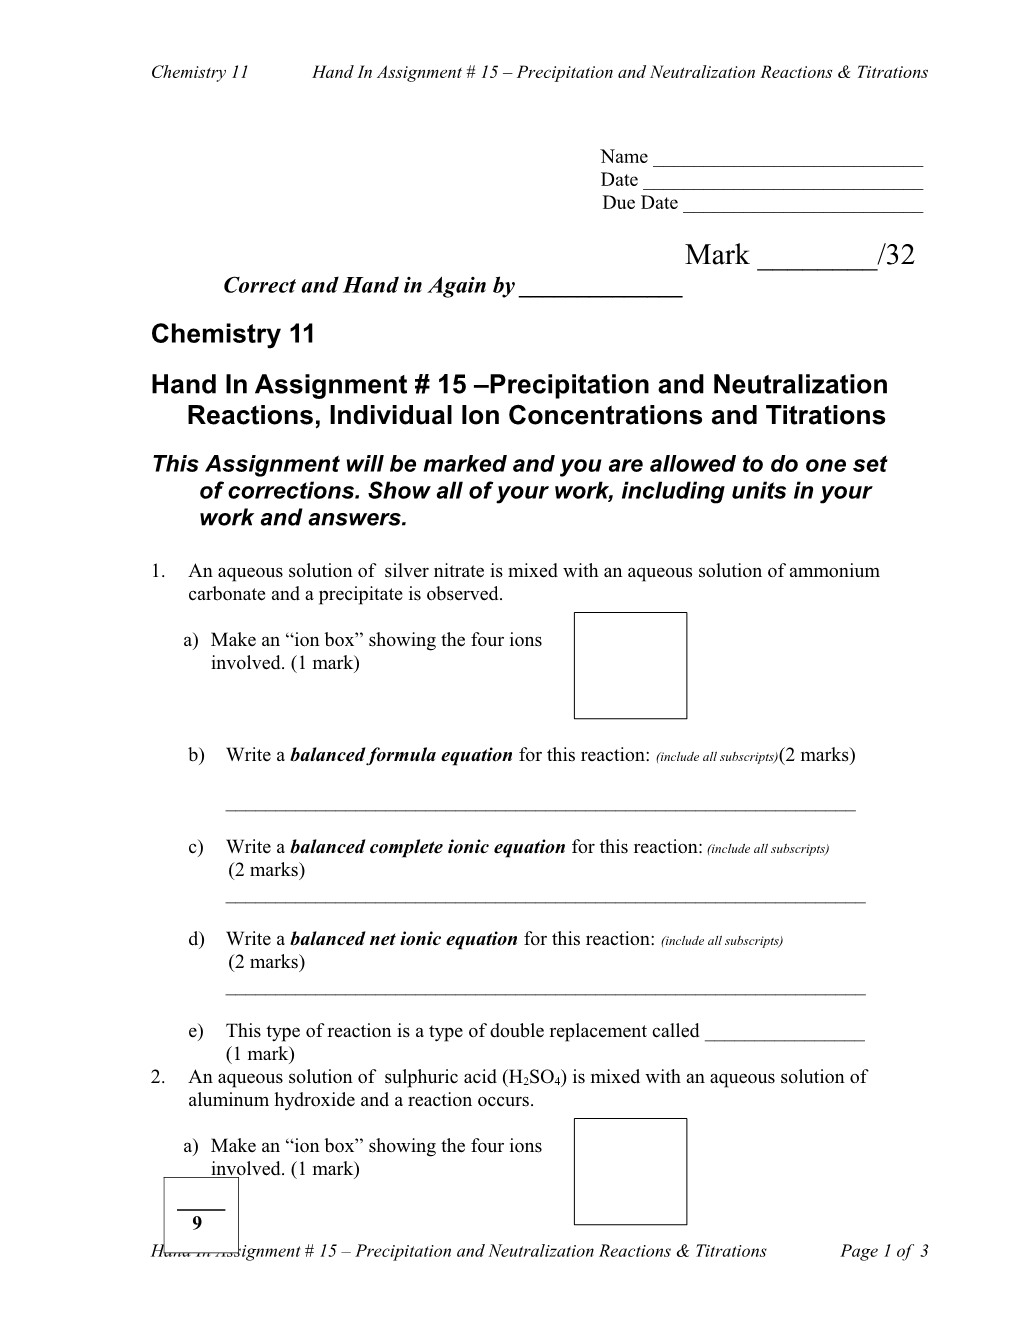 Chemistry 11Hand in Assignment # 15 Precipitation and Neutralization Reactions & Titrations